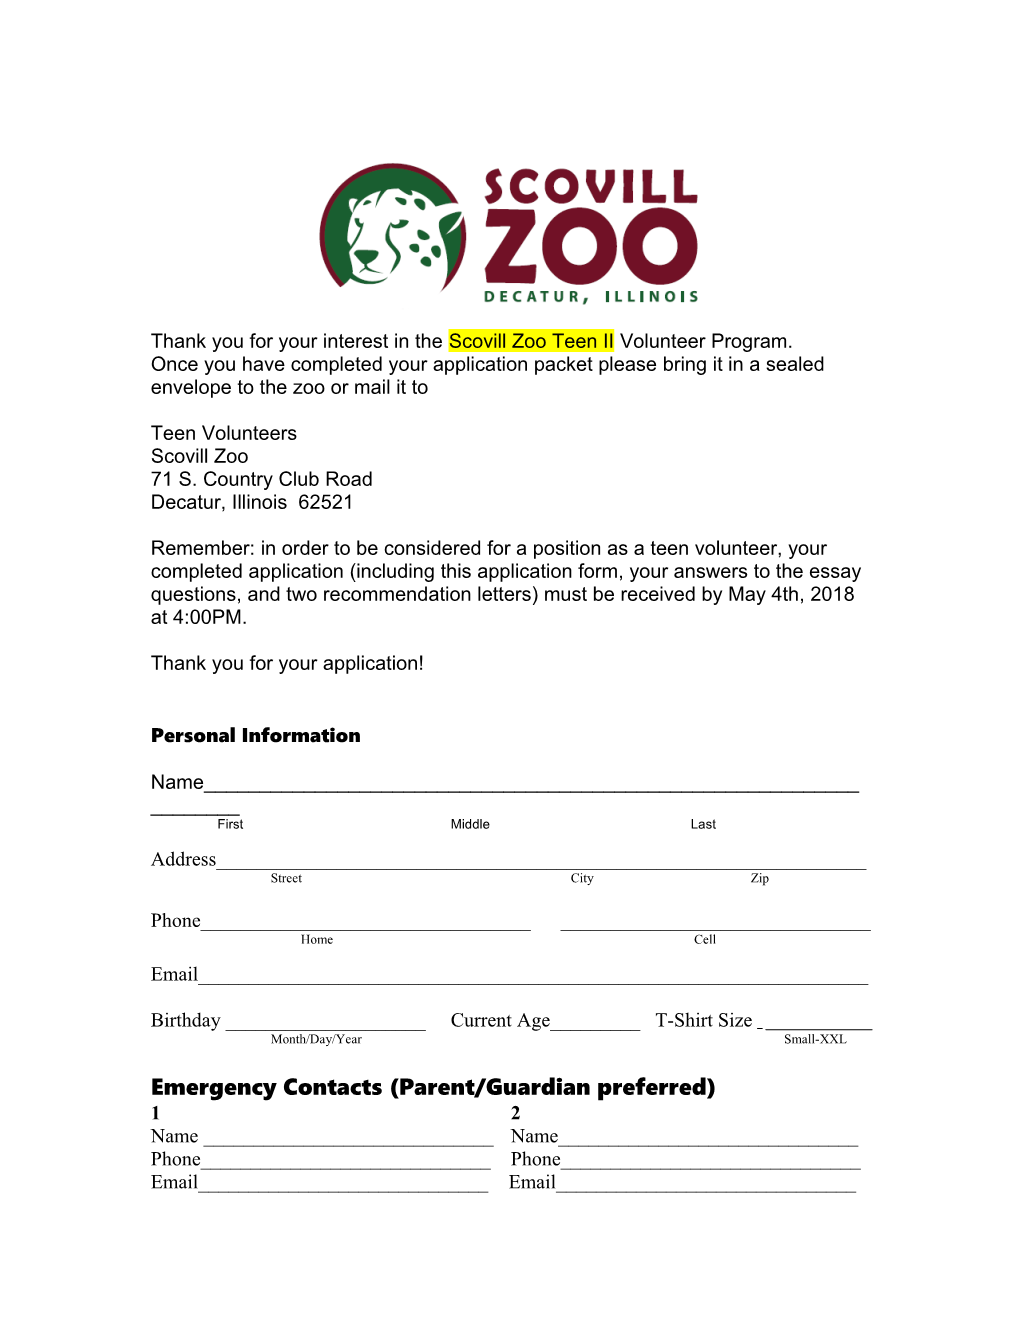 Thank You for Your Interest in the Scovill Zoo Teenii Volunteer Program